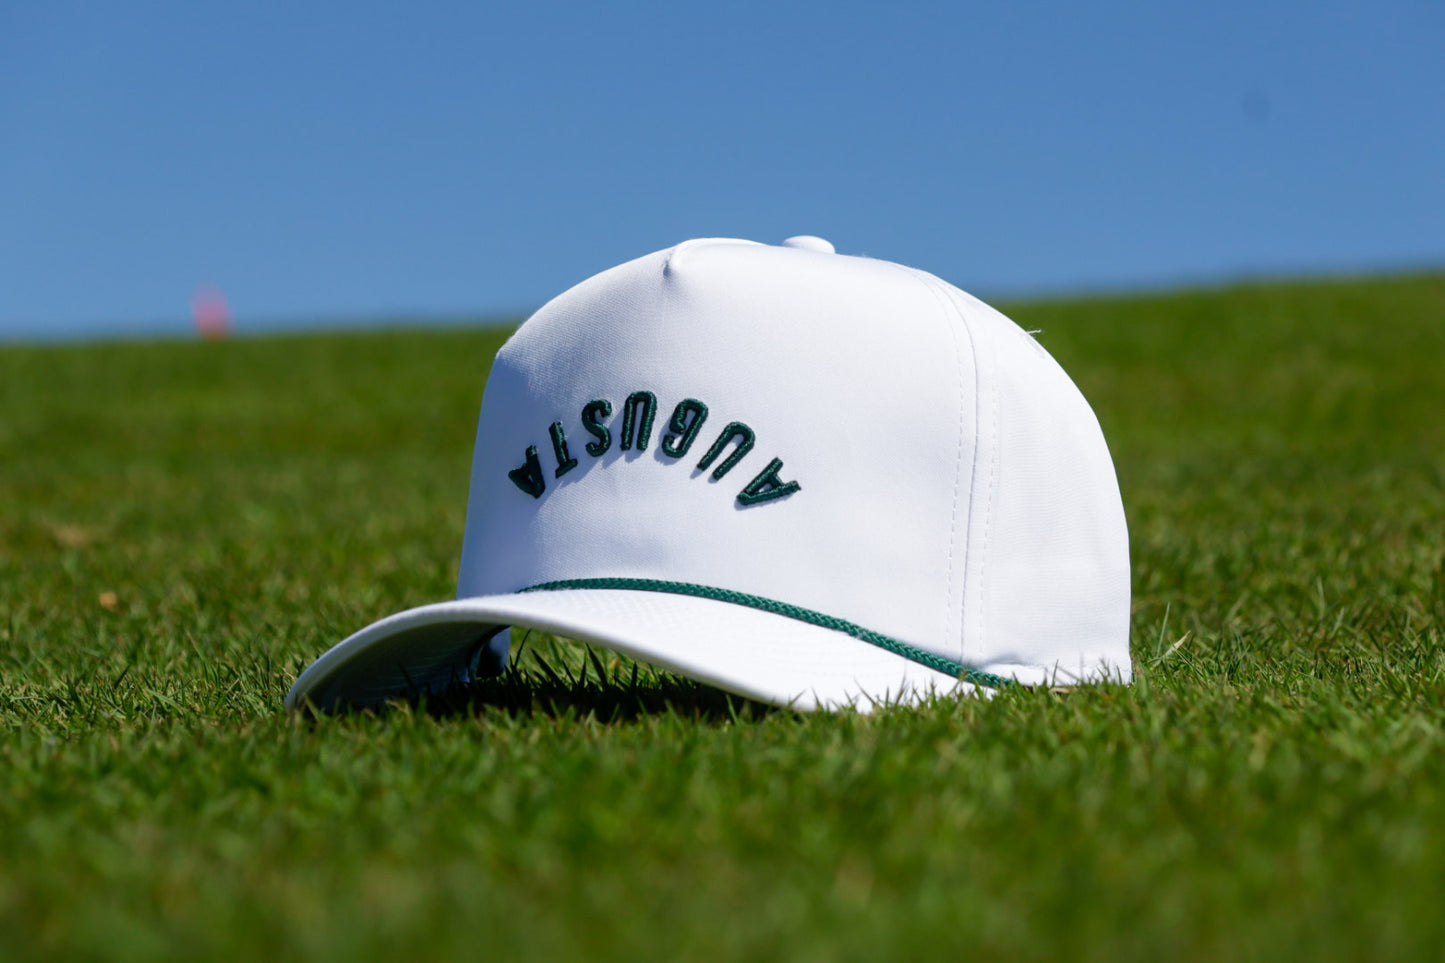 The Augusta (Limited Edition)